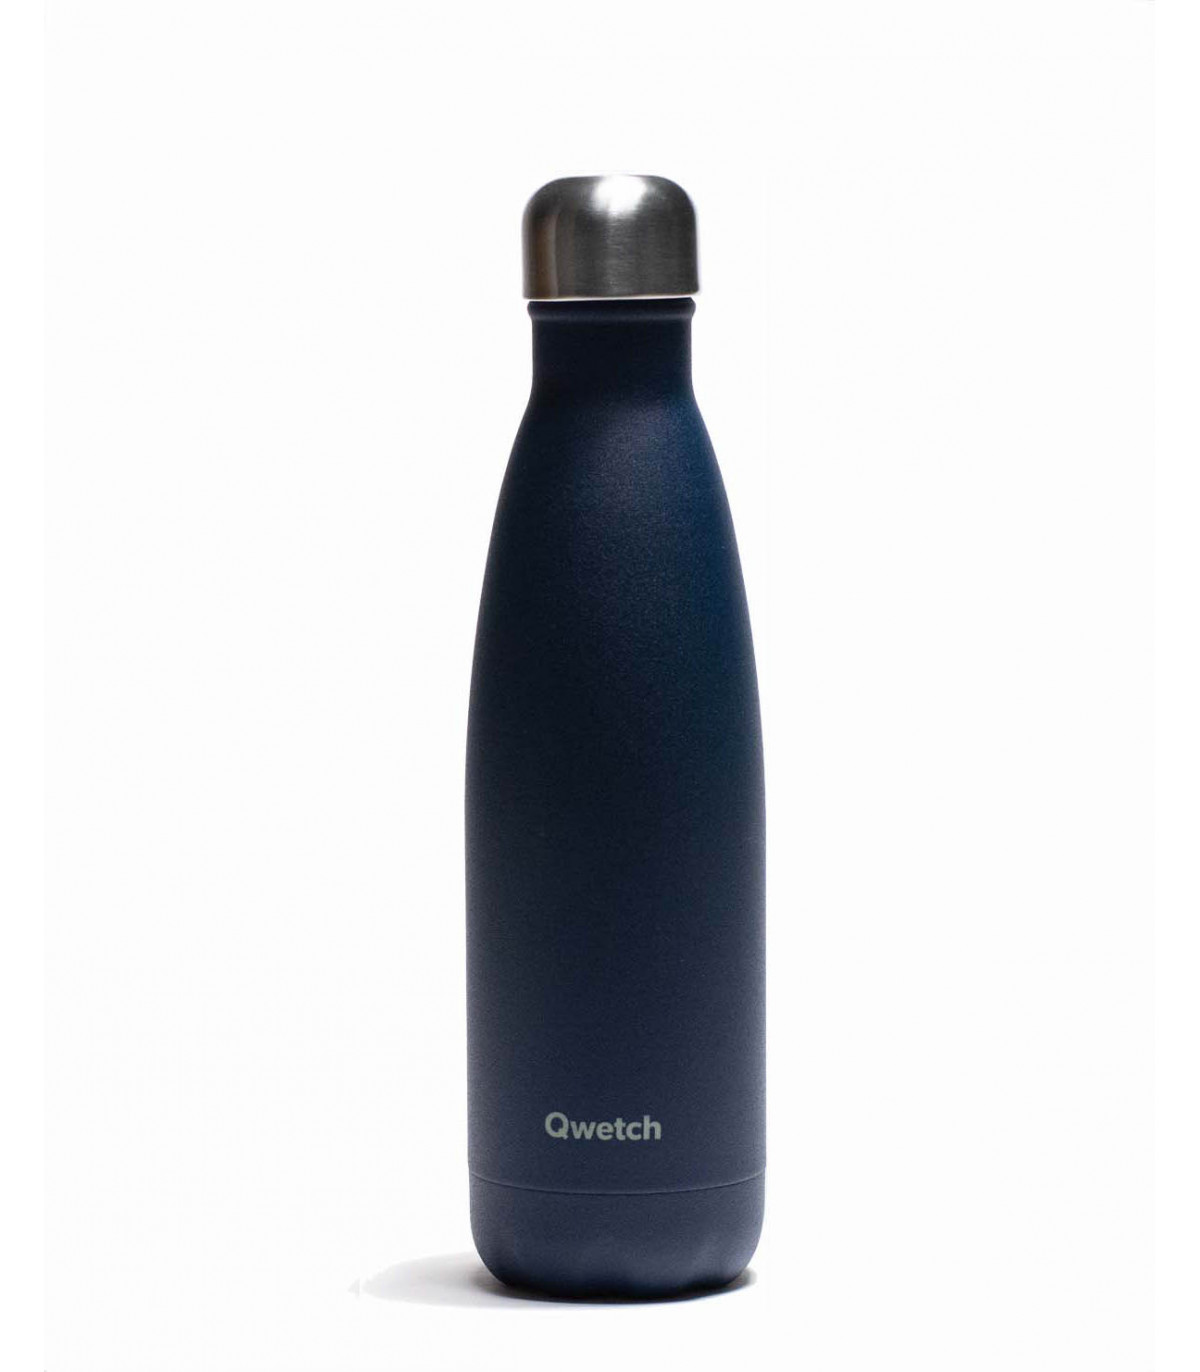 Ludilabel  Gourde bouteille isotherme - Granite bleu - 260ml - Qwetch